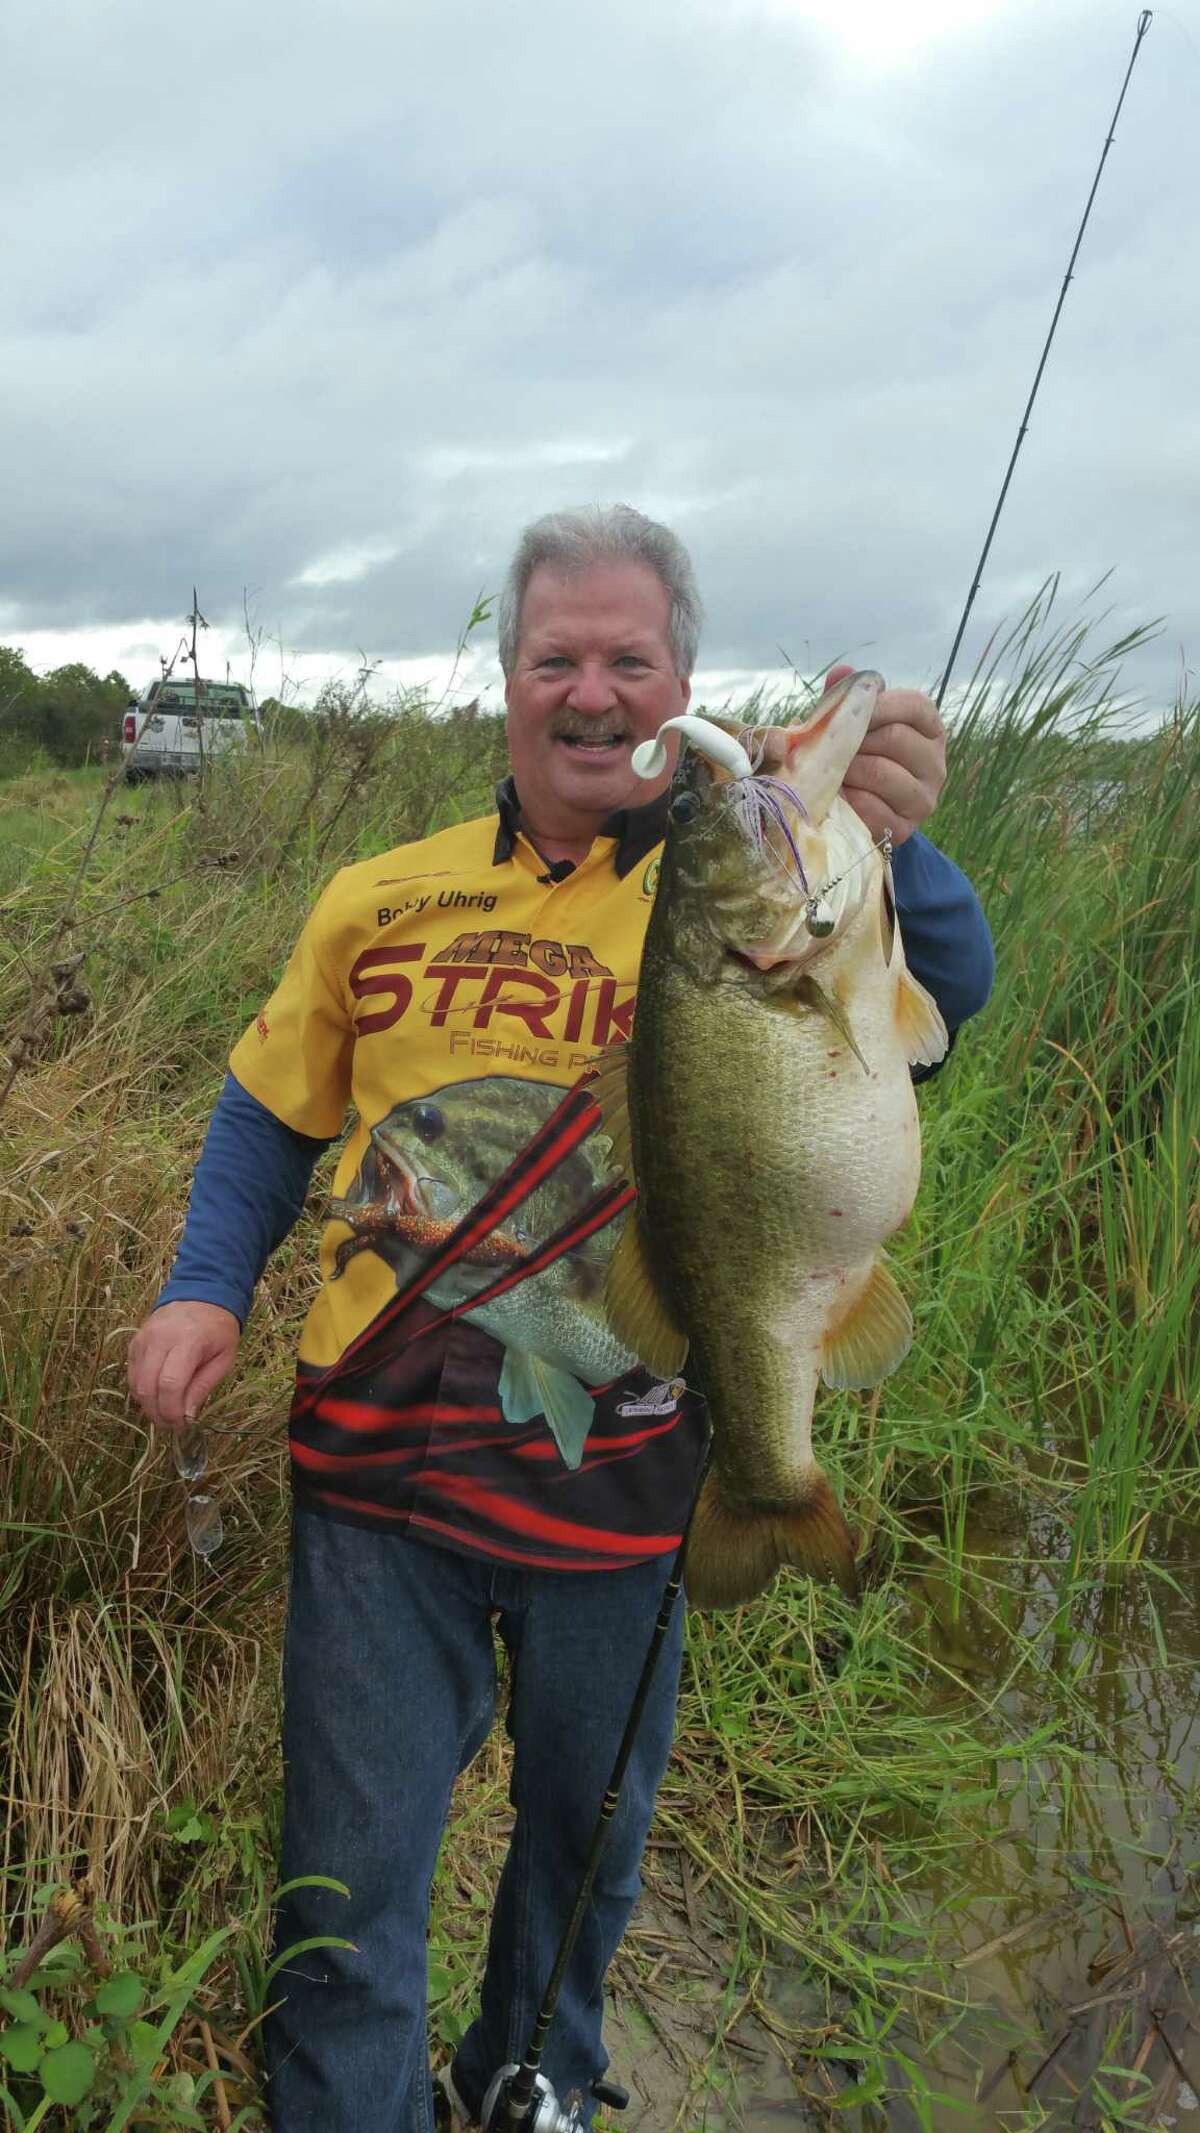 Producer adds CT Fishing & Outdoor Show at Mohegan Sun Feb. 1416